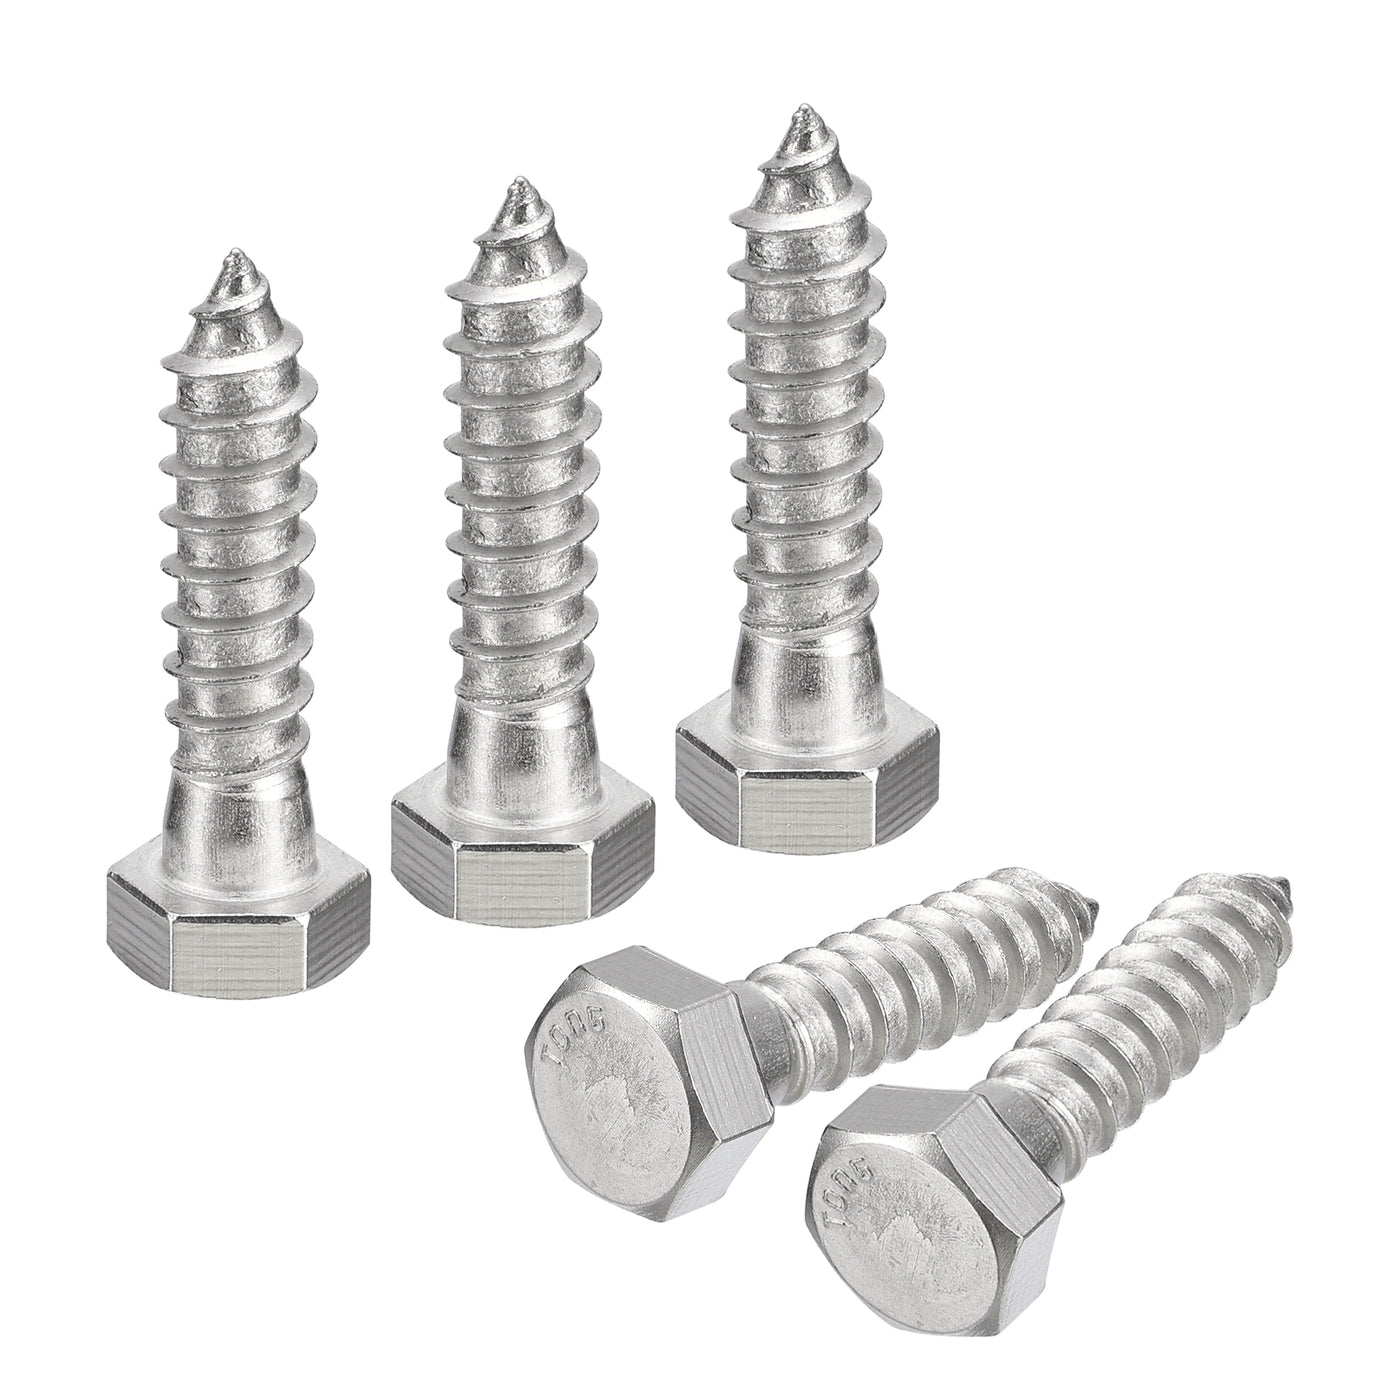 uxcell Uxcell Hex Head Lag Screws Bolts, 10pcs 1/2" x 2" 304 Stainless Steel Wood Screws